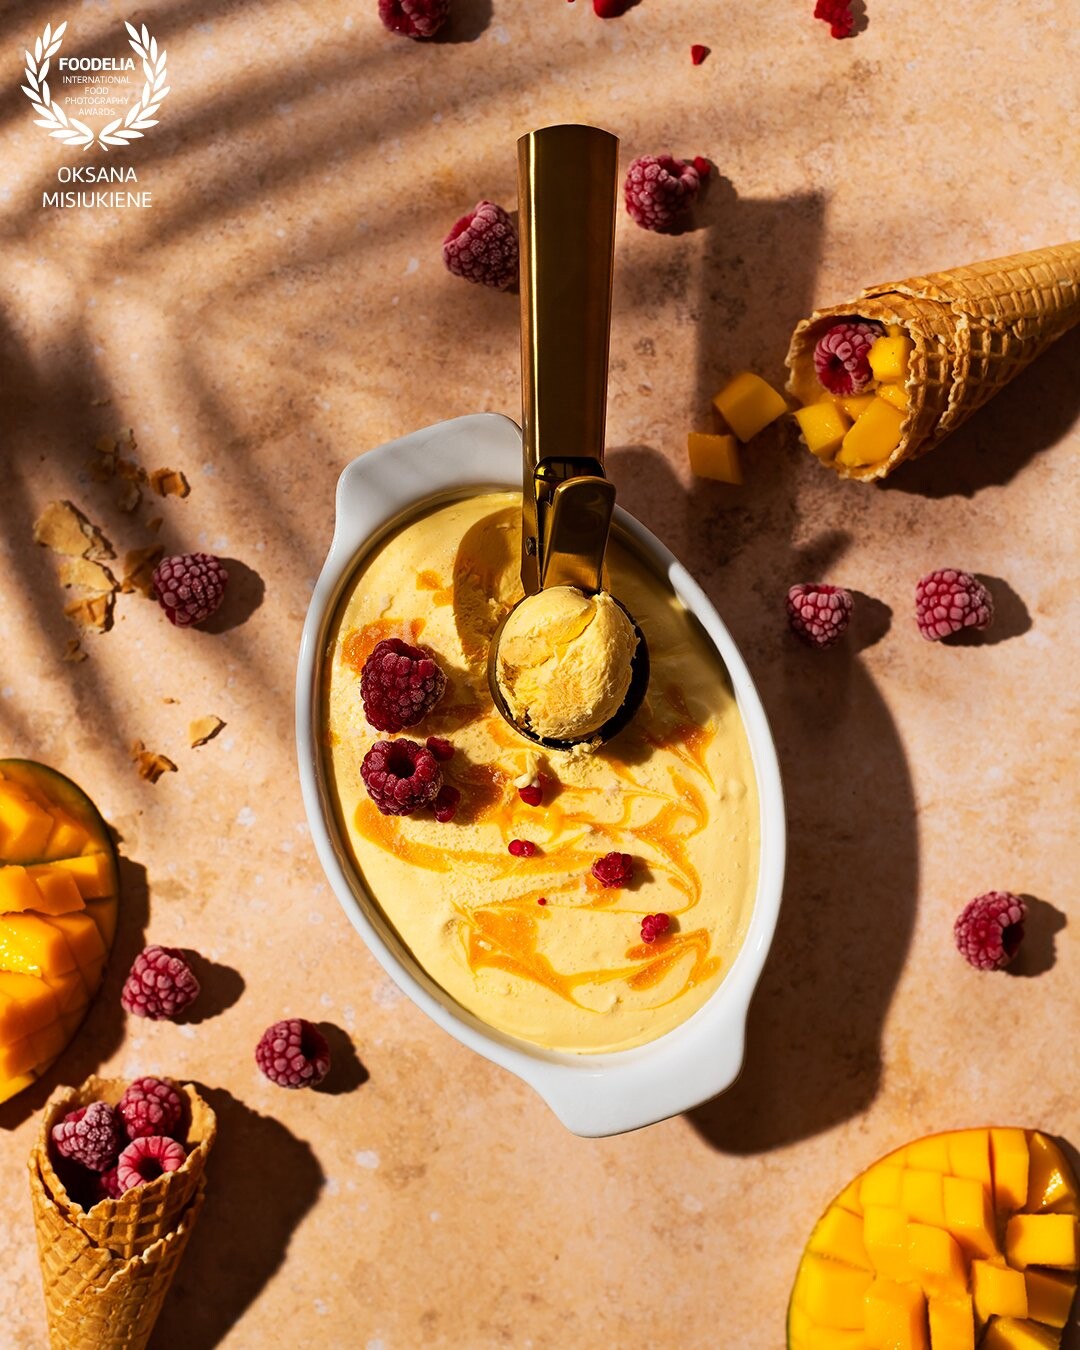 Is there anything more delicious than a dessert made with your favorite fruit? Well this Mango ice cream is heavenly & you will fall in love with it instantly. This homemade mango ice cream tastes like summer and is so easy to make!